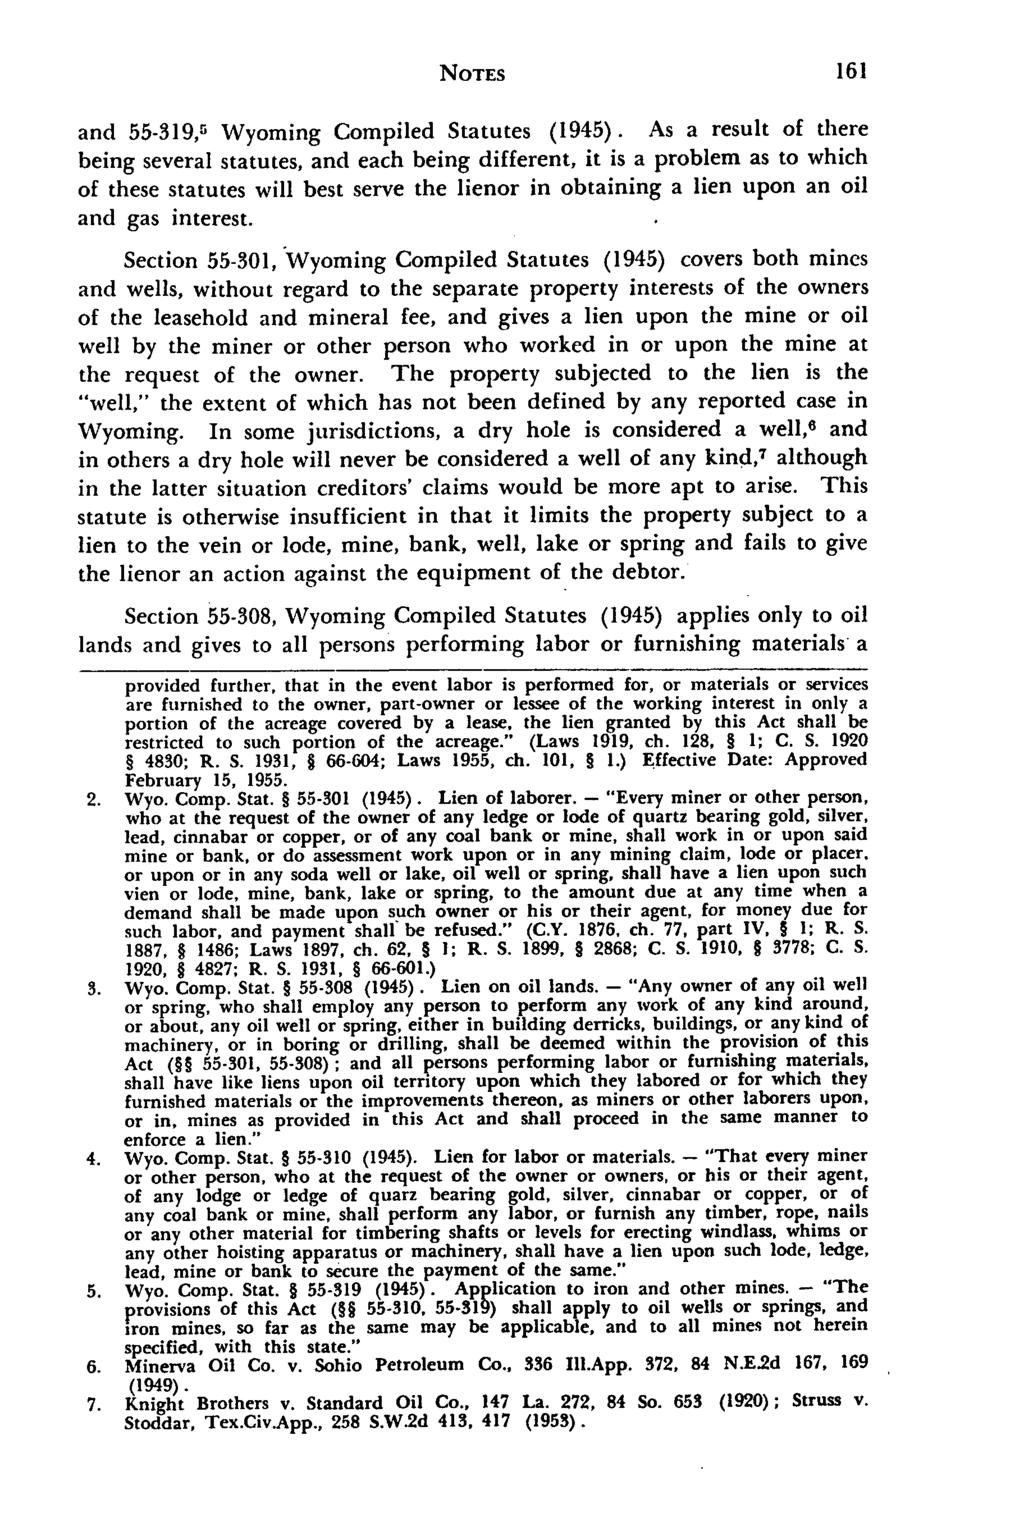 and 55-319, 5 Wyoming Compiled Statutes (1945).